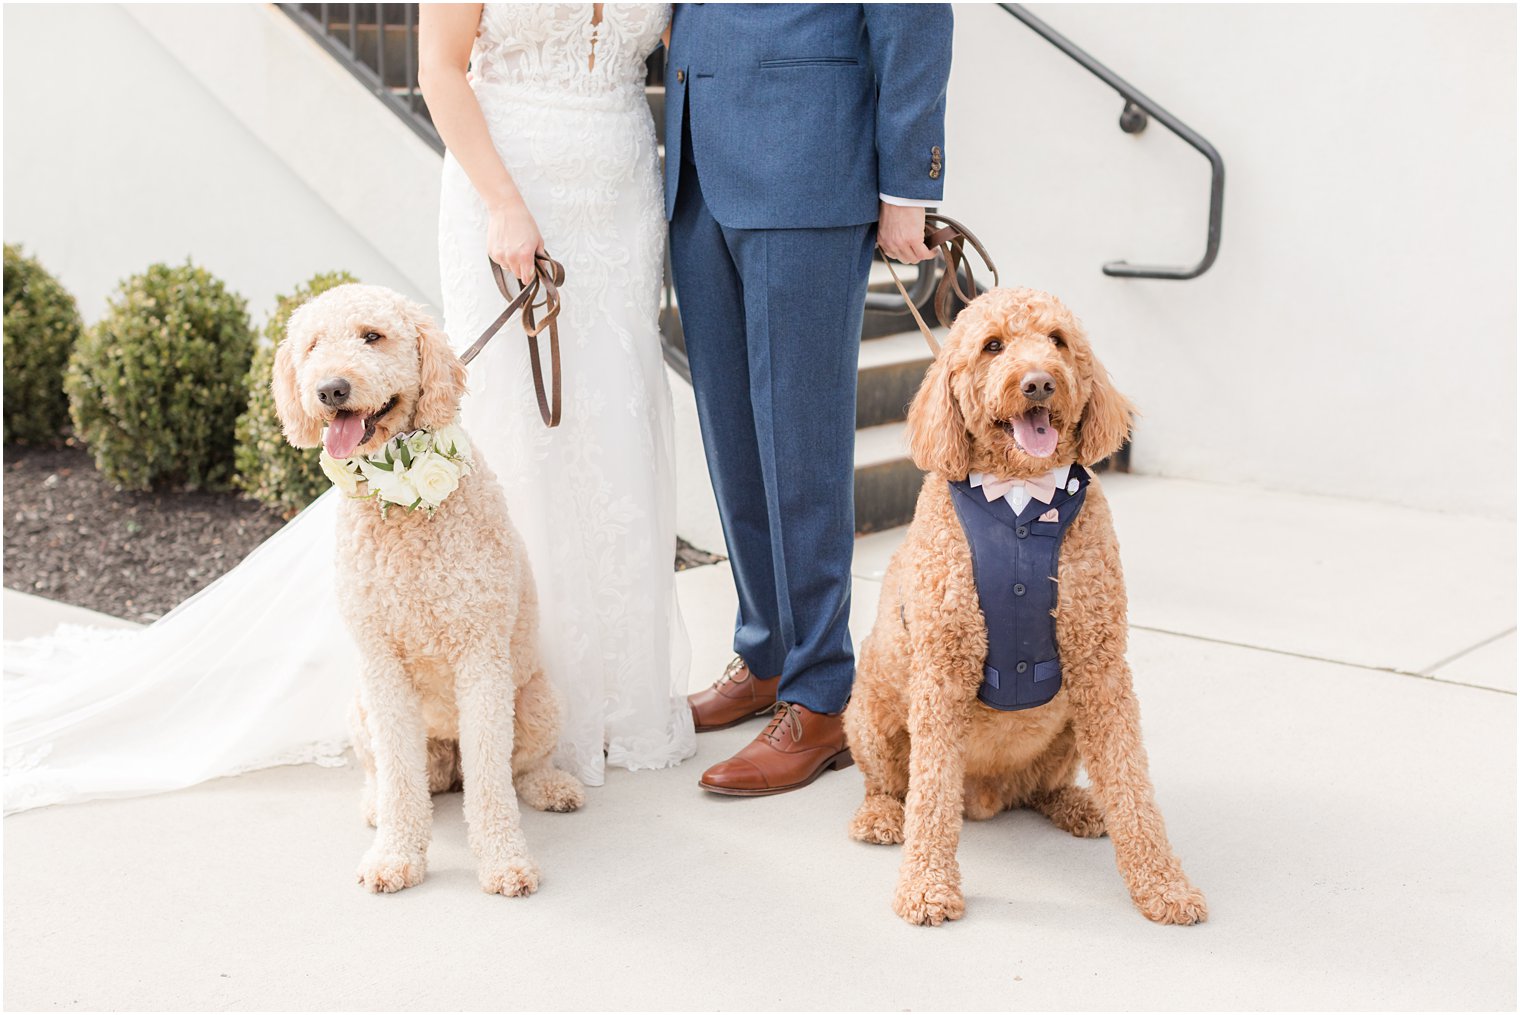 bride and groom with dogs at Renault Winery in Egg Harbor Township, NJ